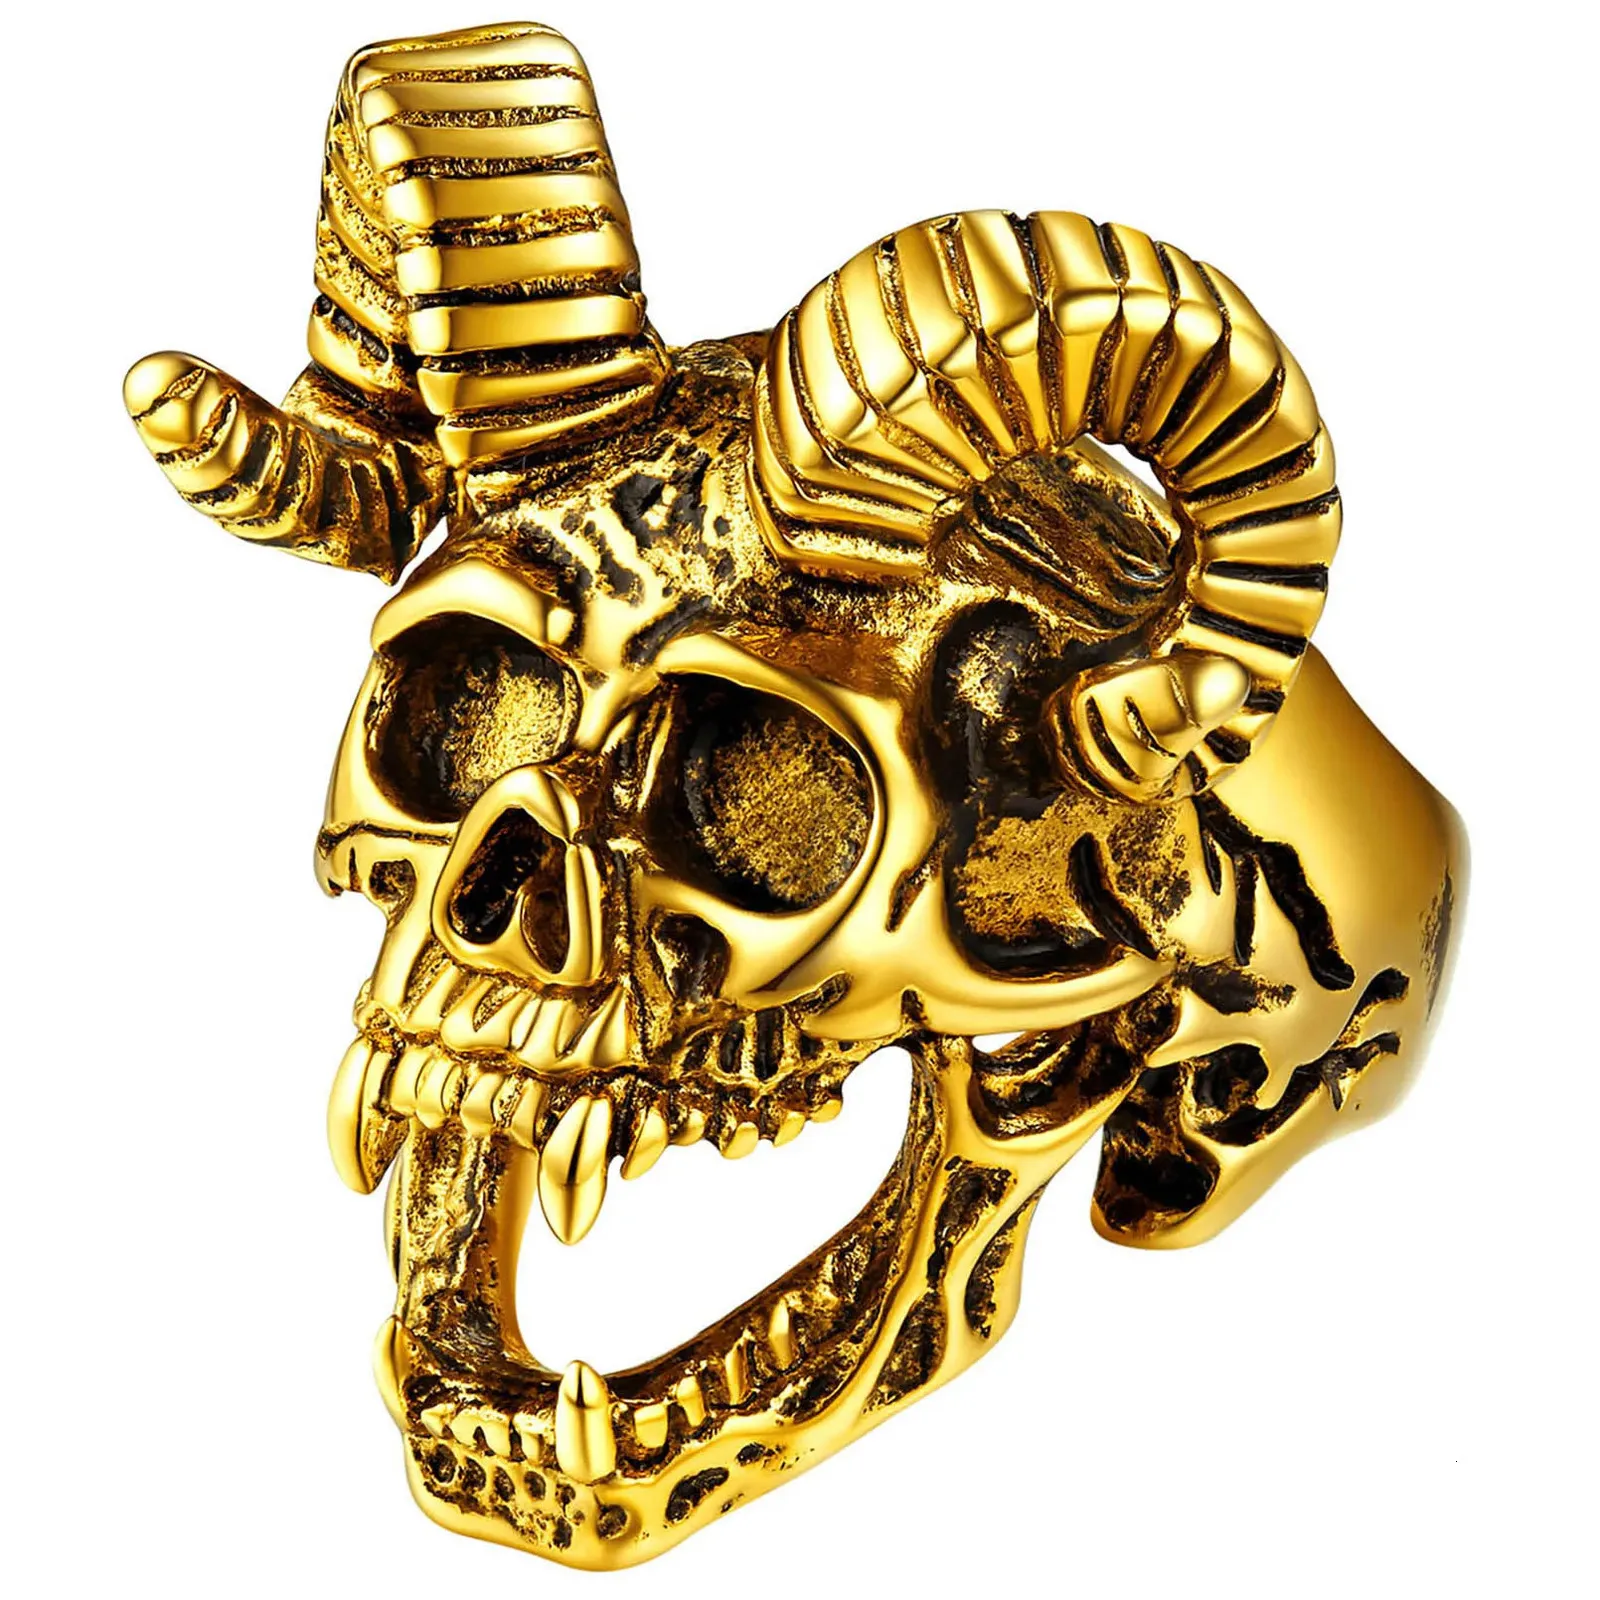 Solitaire Ring ChainsPro Punk Stainless Steel Gold Plated Black Plated Satan Baphomet Goat Skull Head Biker Rings for Men Women CP781 231201